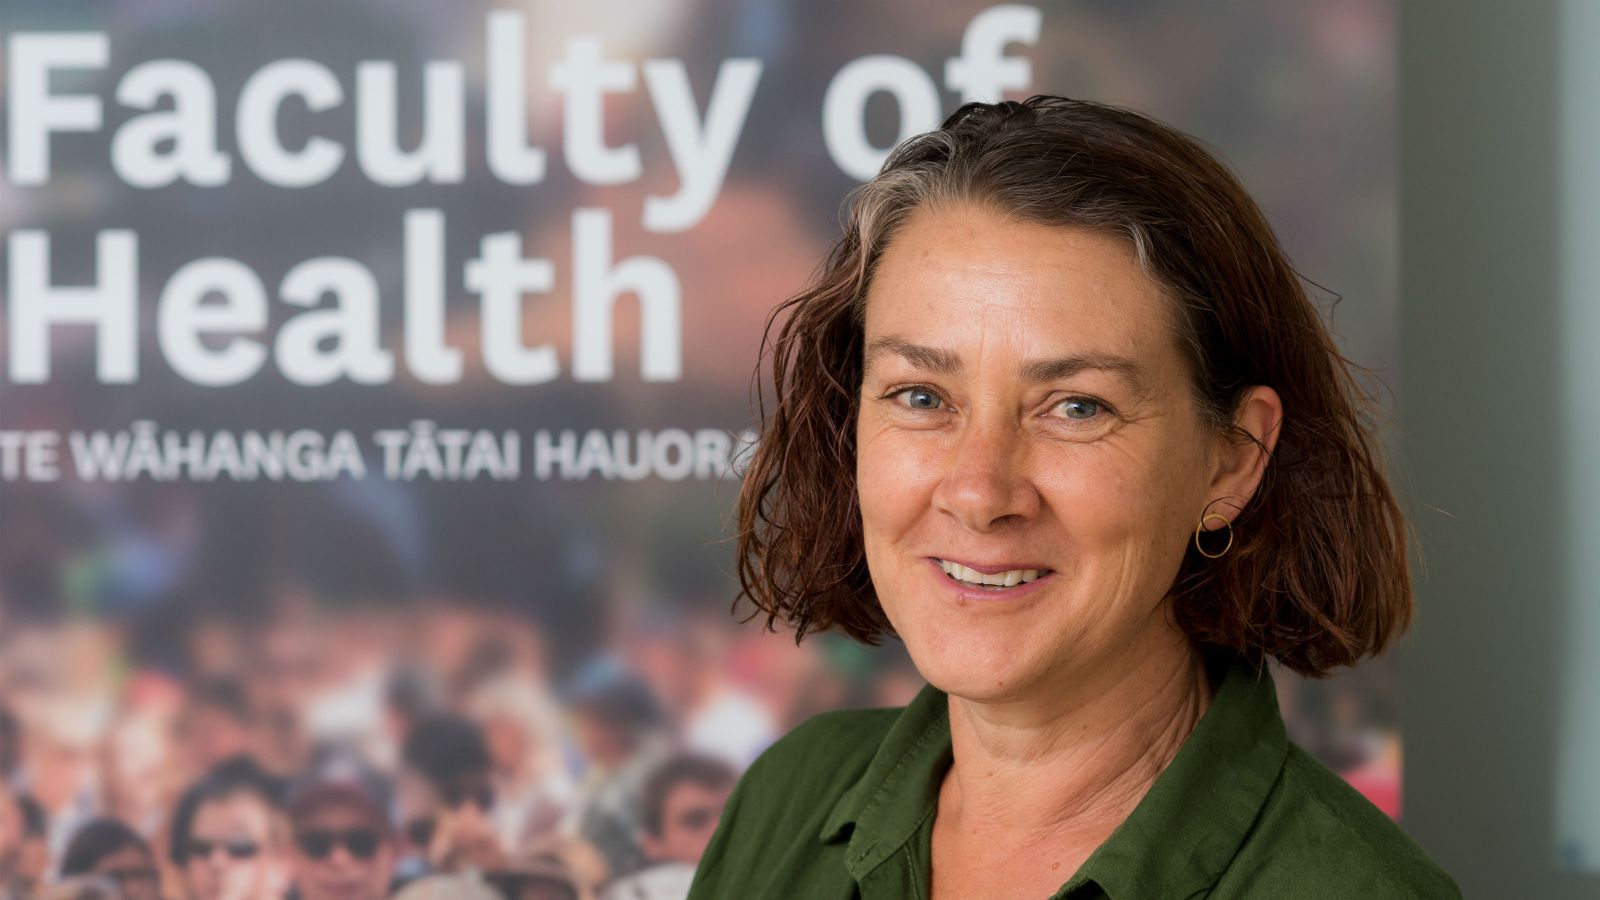 Dr Terry Fleming stands before a poster that includes the text 'Faculty of Health, Te Wāhanga Tātai Hauora' and a graphic of a crowd of people.